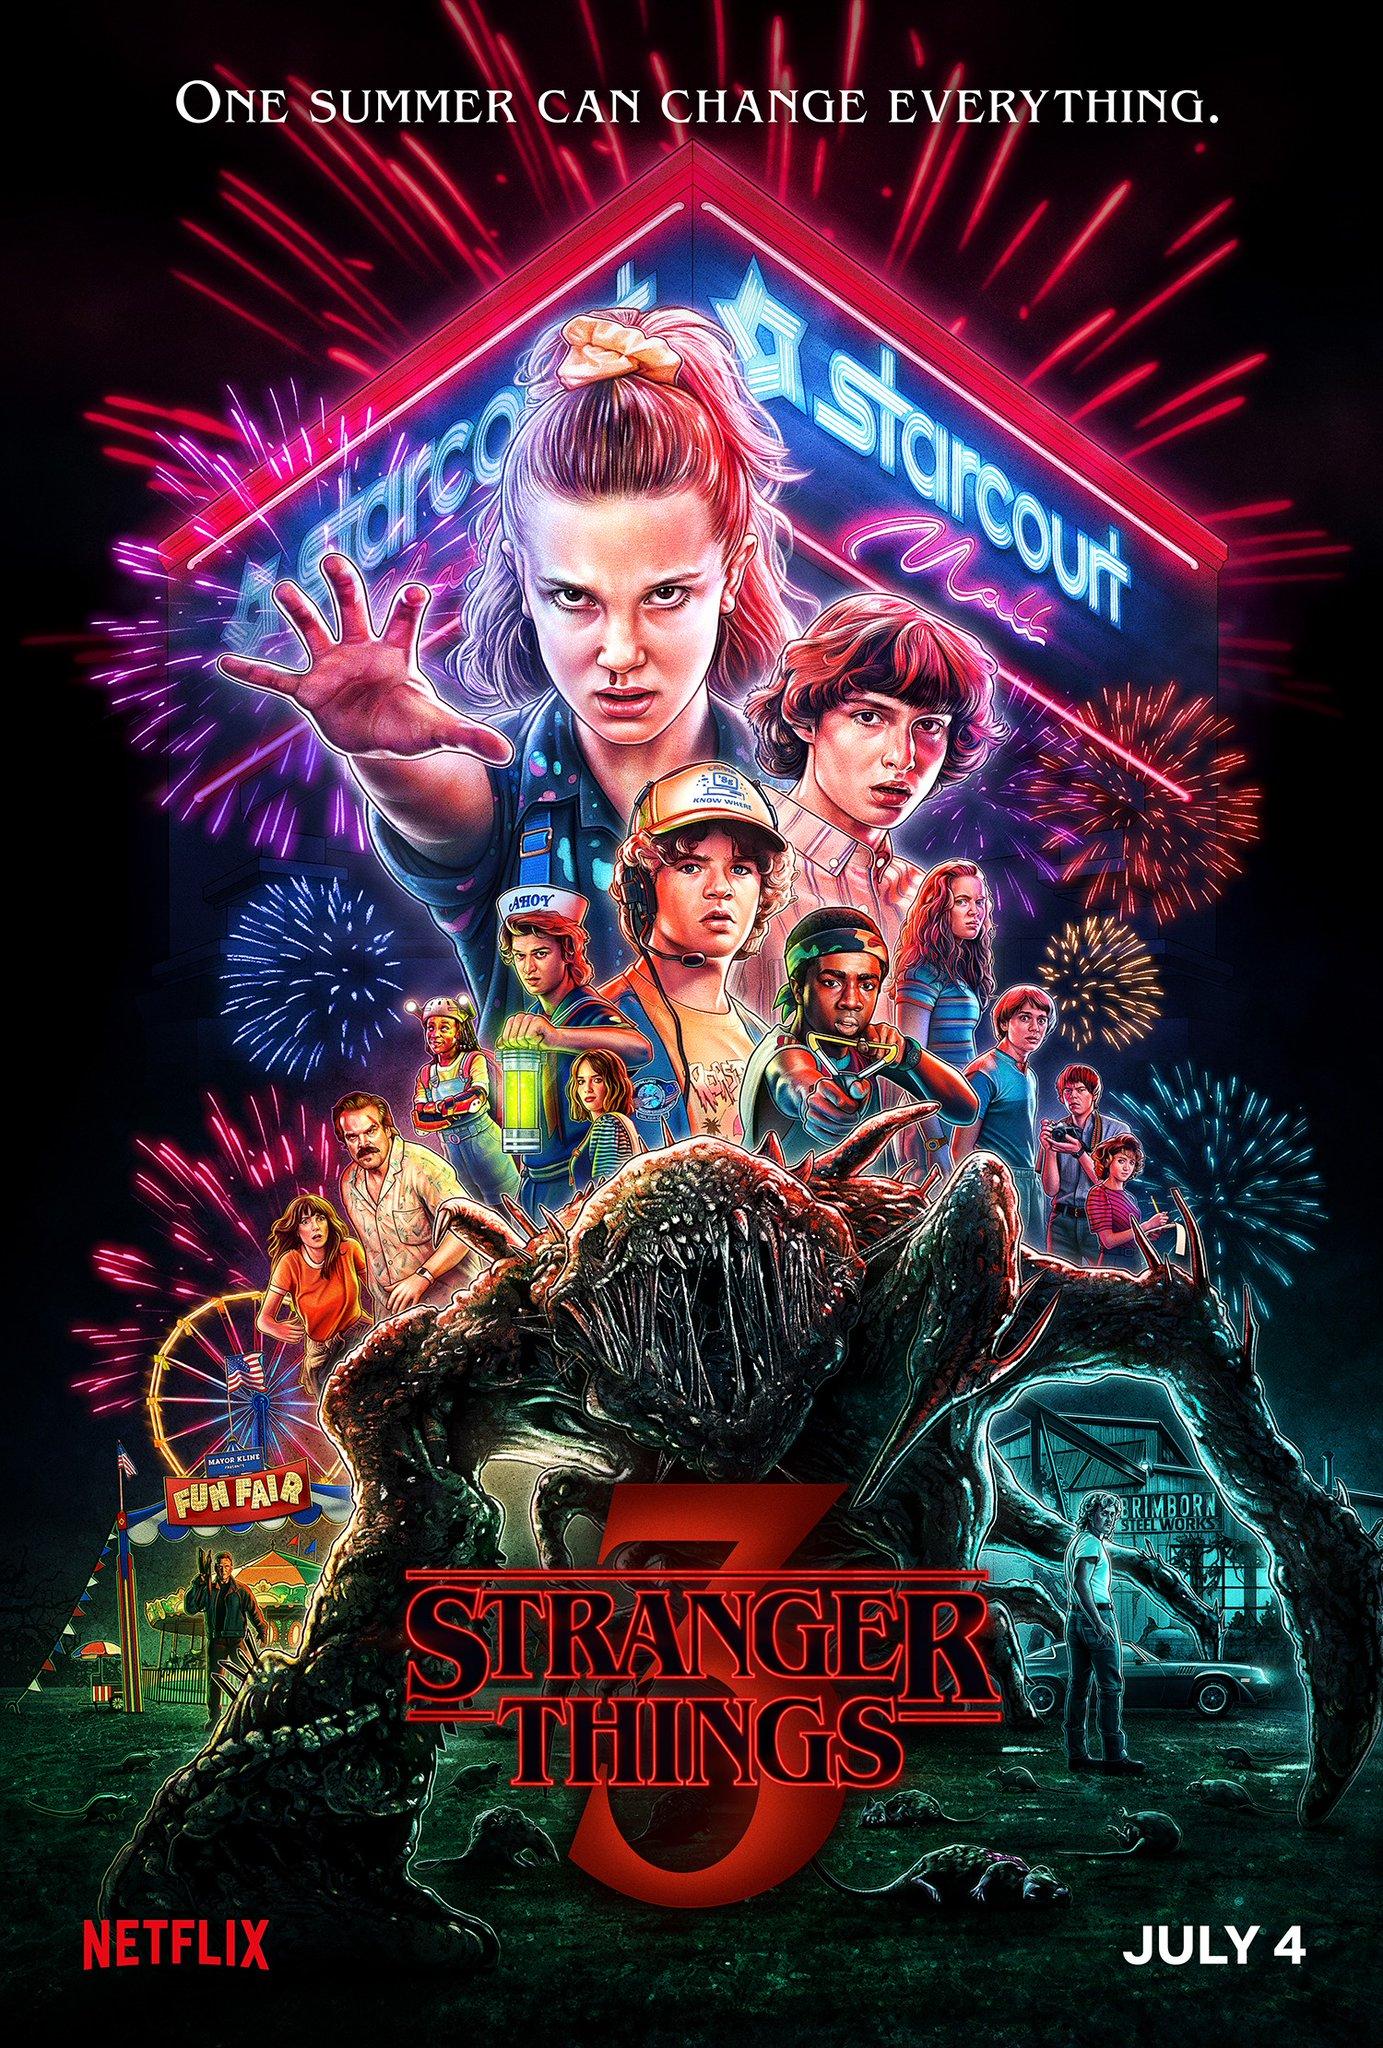 Stranger Things 3: Dacre Montgomery on Becoming the Show's